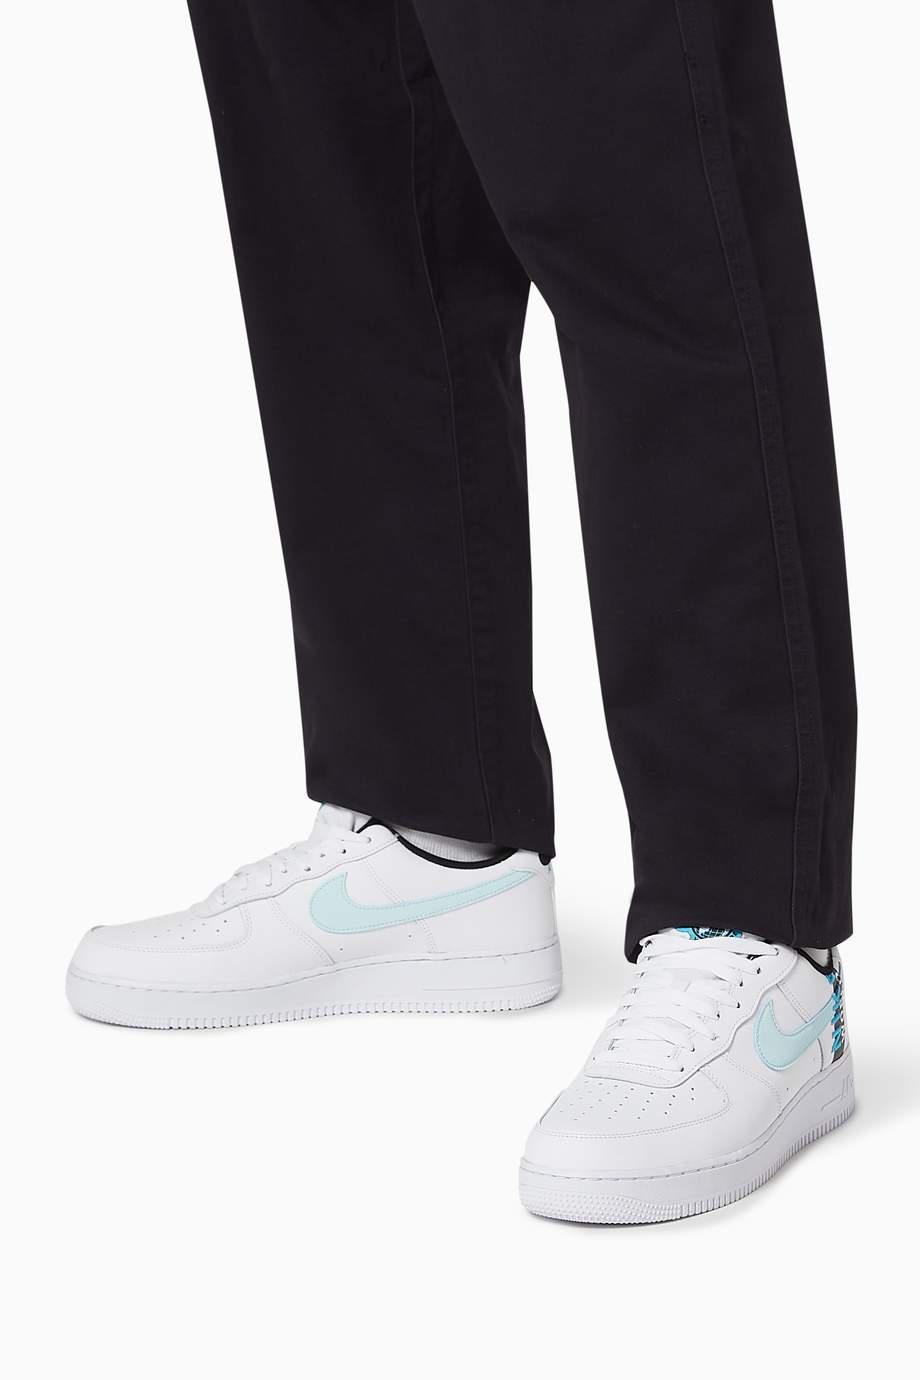 Shop Nike White Air Force 1'07 LV8 Sneakers in Leather for Men | Ounass UAE